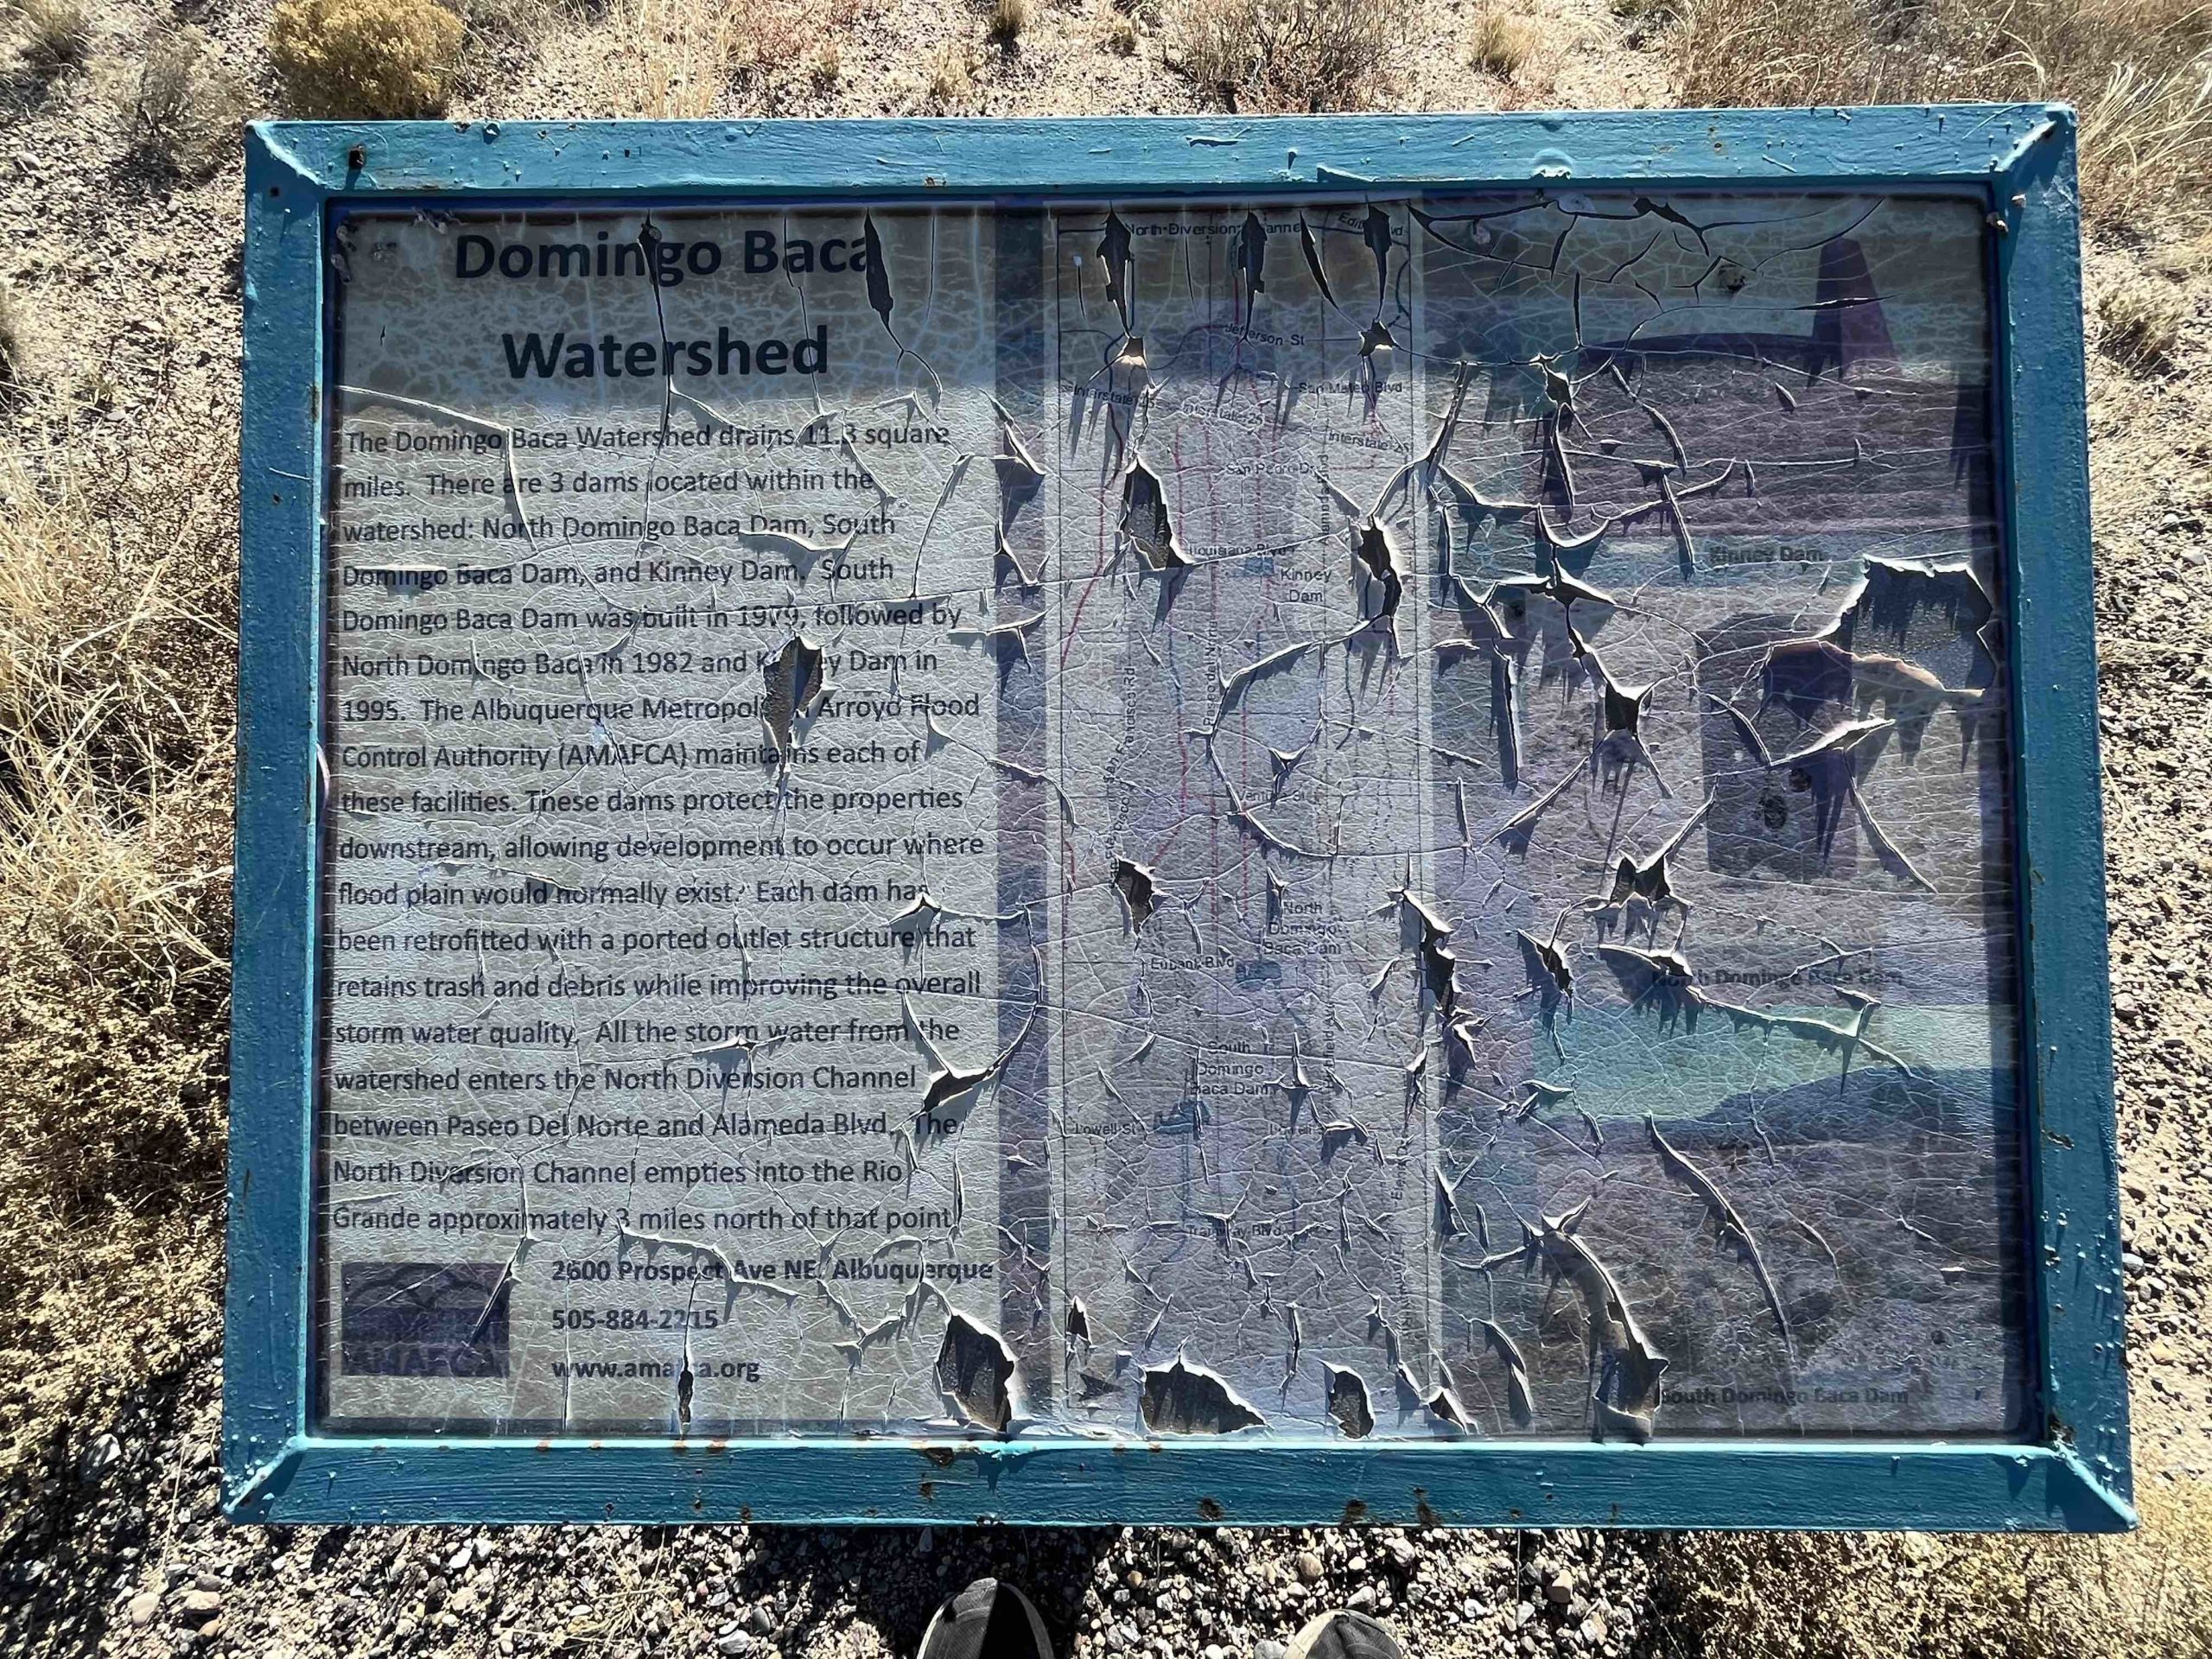 A tattered sign provides information on the North Domingo Baca Watershed. (Scott Albright/Neighborhood Journal)